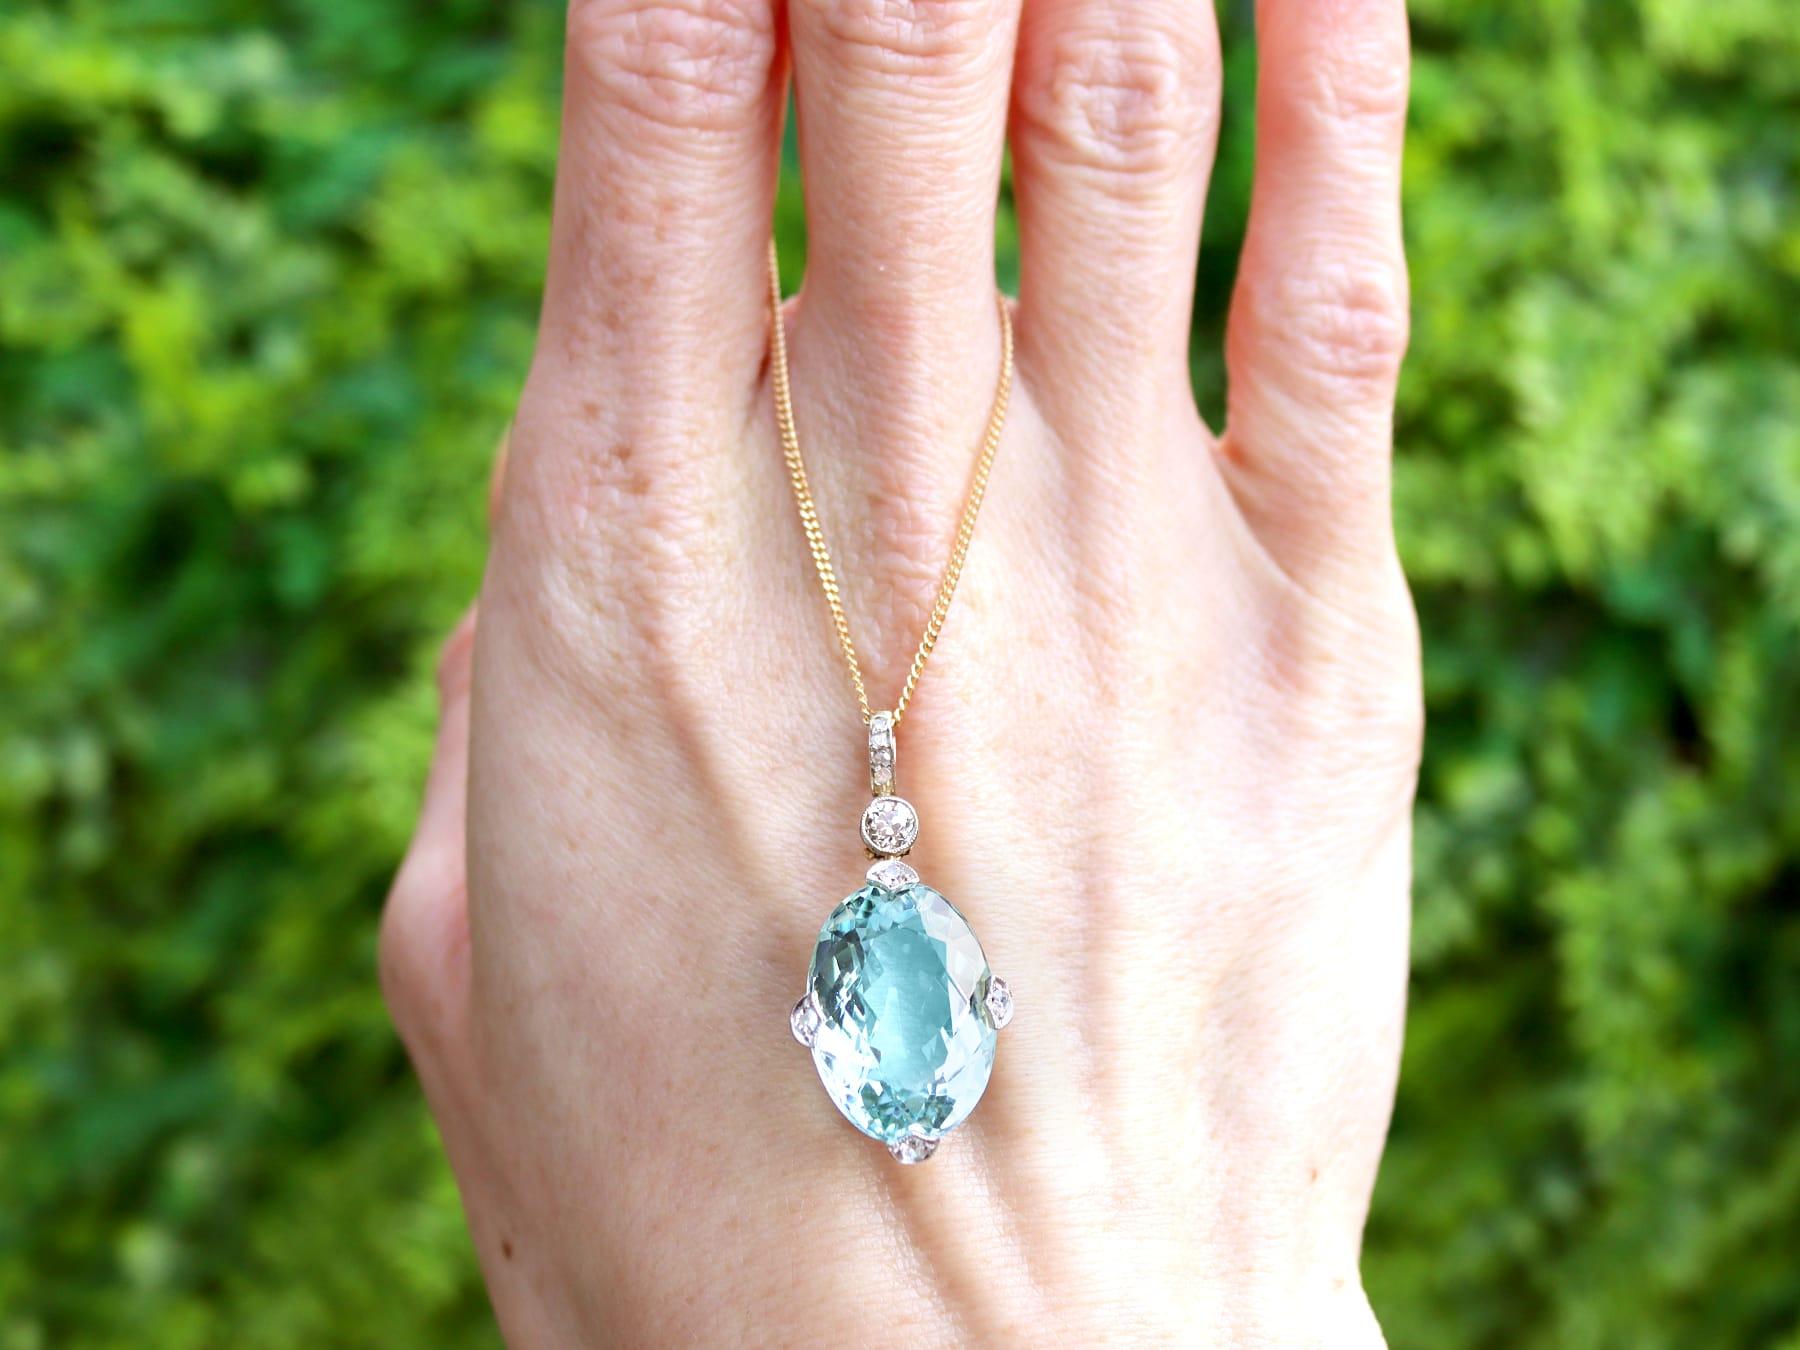 A stunning, fine and impressive antique 5.17 carat oval cut aquamarine and 0.36 carat diamond, 14 karat yellow gold and white gold set pendant; part of our diverse antique jewellery and estate jewelry collections.

This stunning, fine and impressive